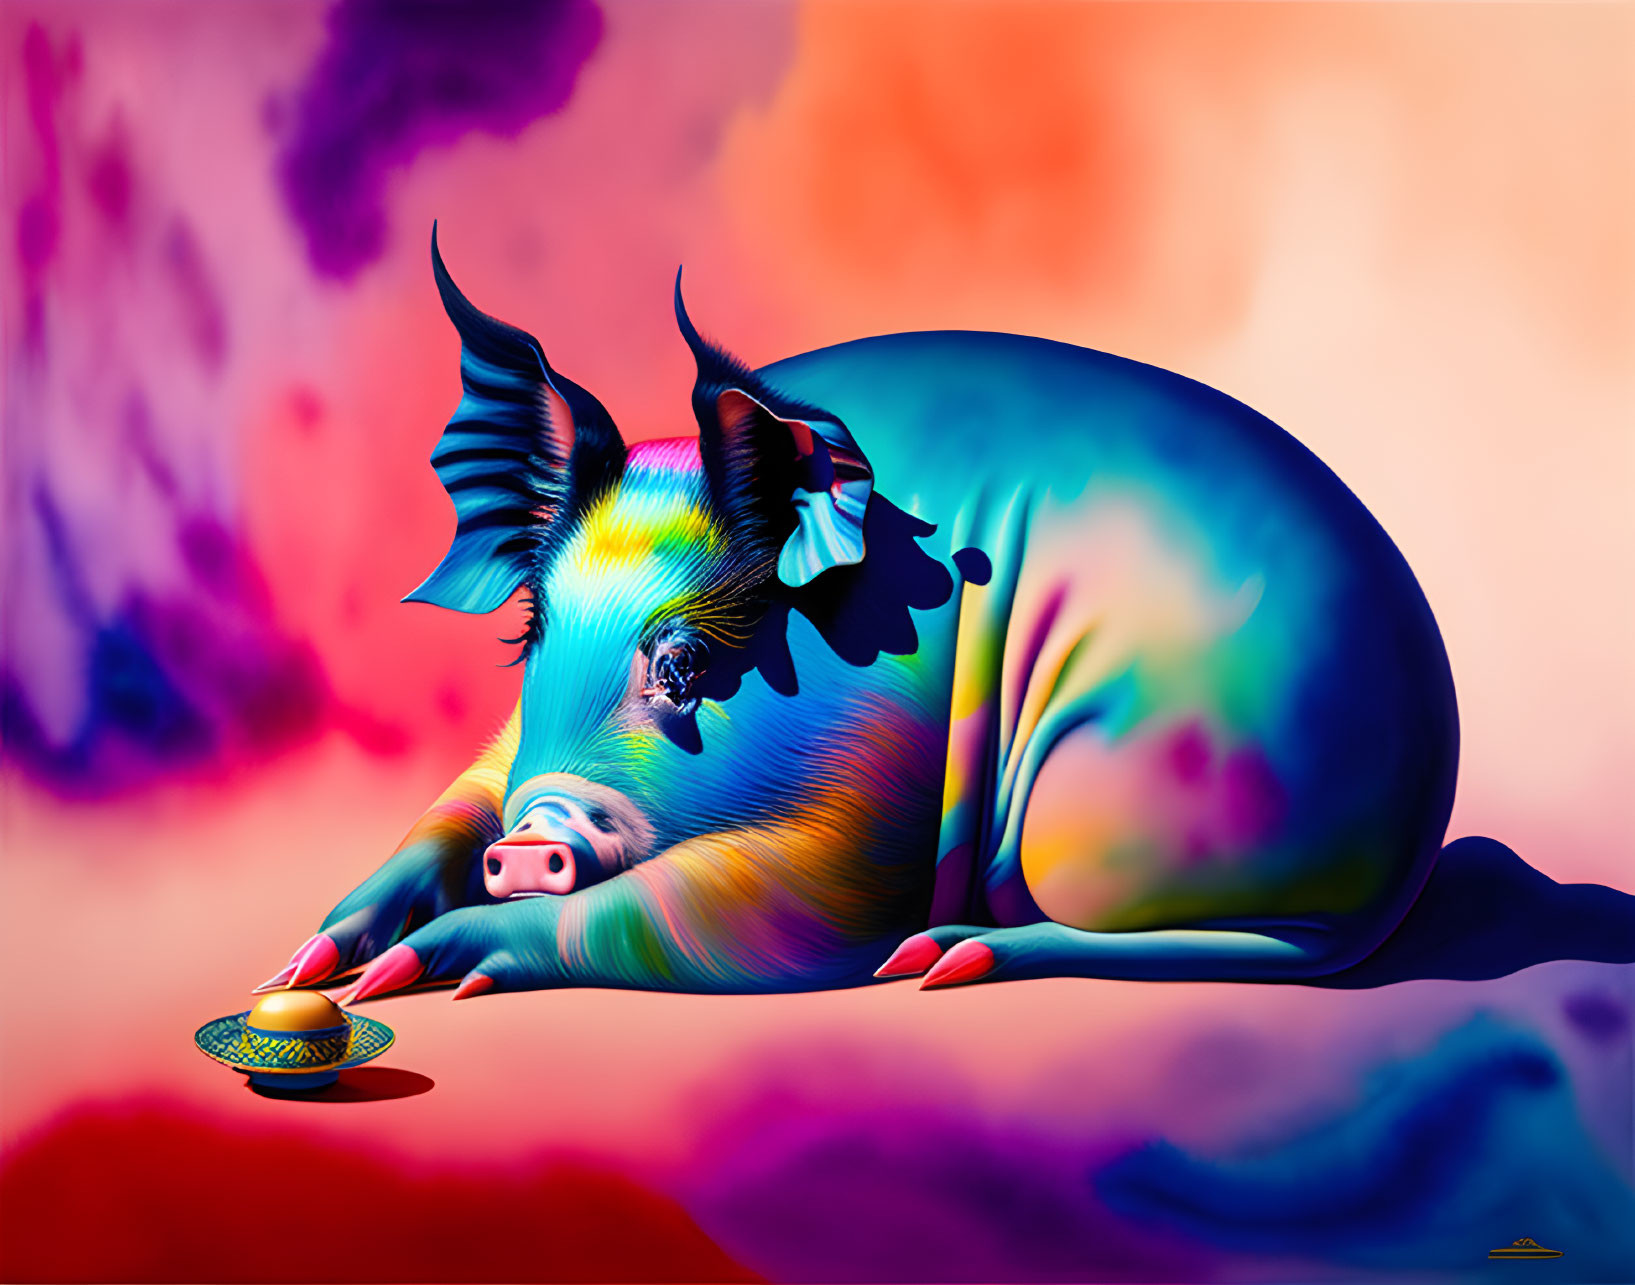 Vibrant pig illustration in blue and purple hues on surreal background